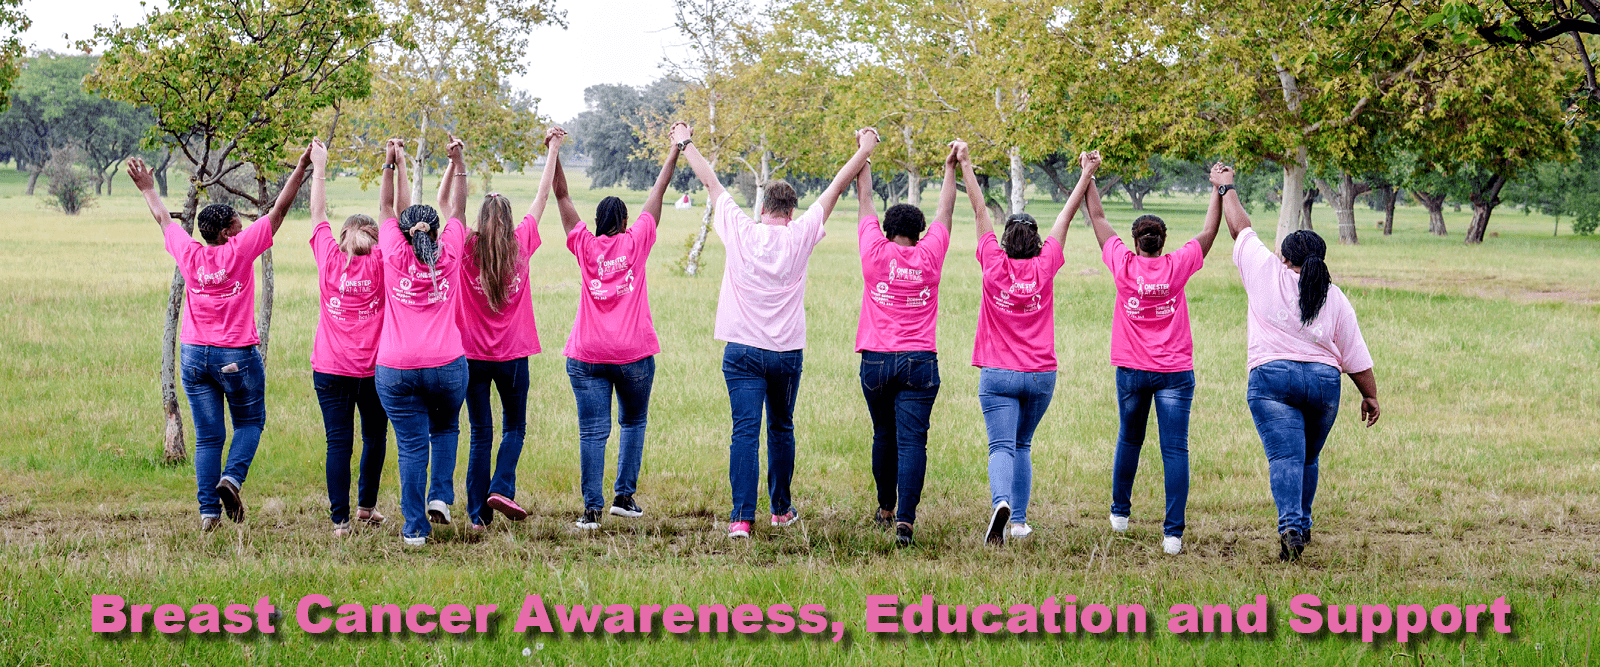 Breast Cancer education awareness and support